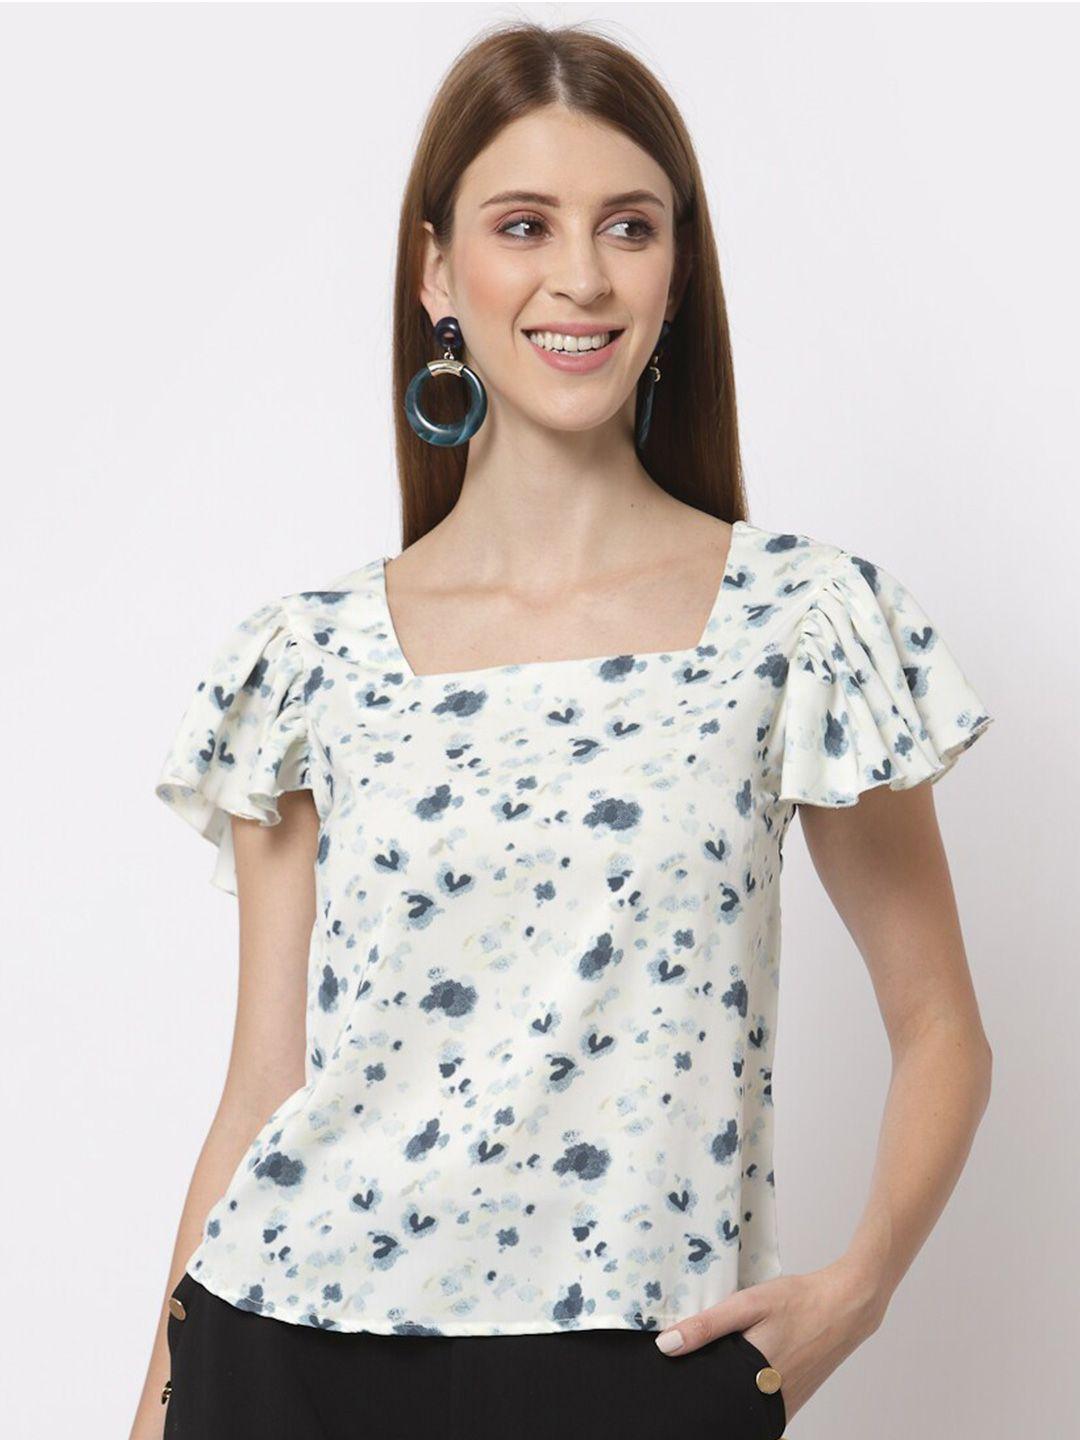 juelle off white & teal floral print top